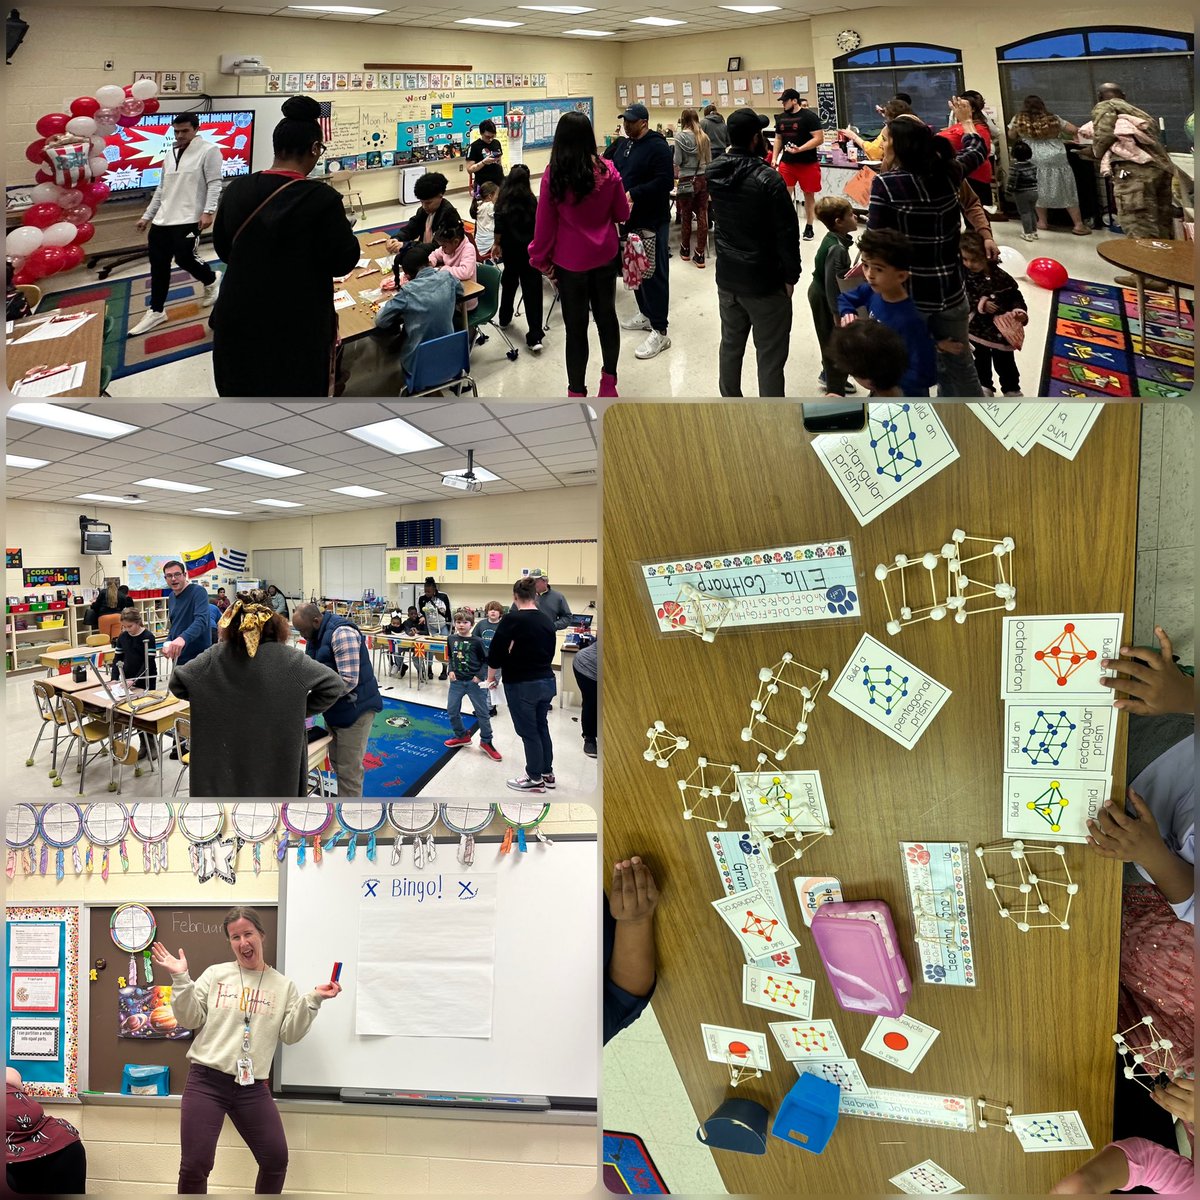 It was a full house for math night! Our cafeteria staff served a delicious spaghetti dinner and parents and students engaged in math activities with our teachers! @mrsgray620 @sarahruddock4 @katiegreene25 @CumberlandCoSch